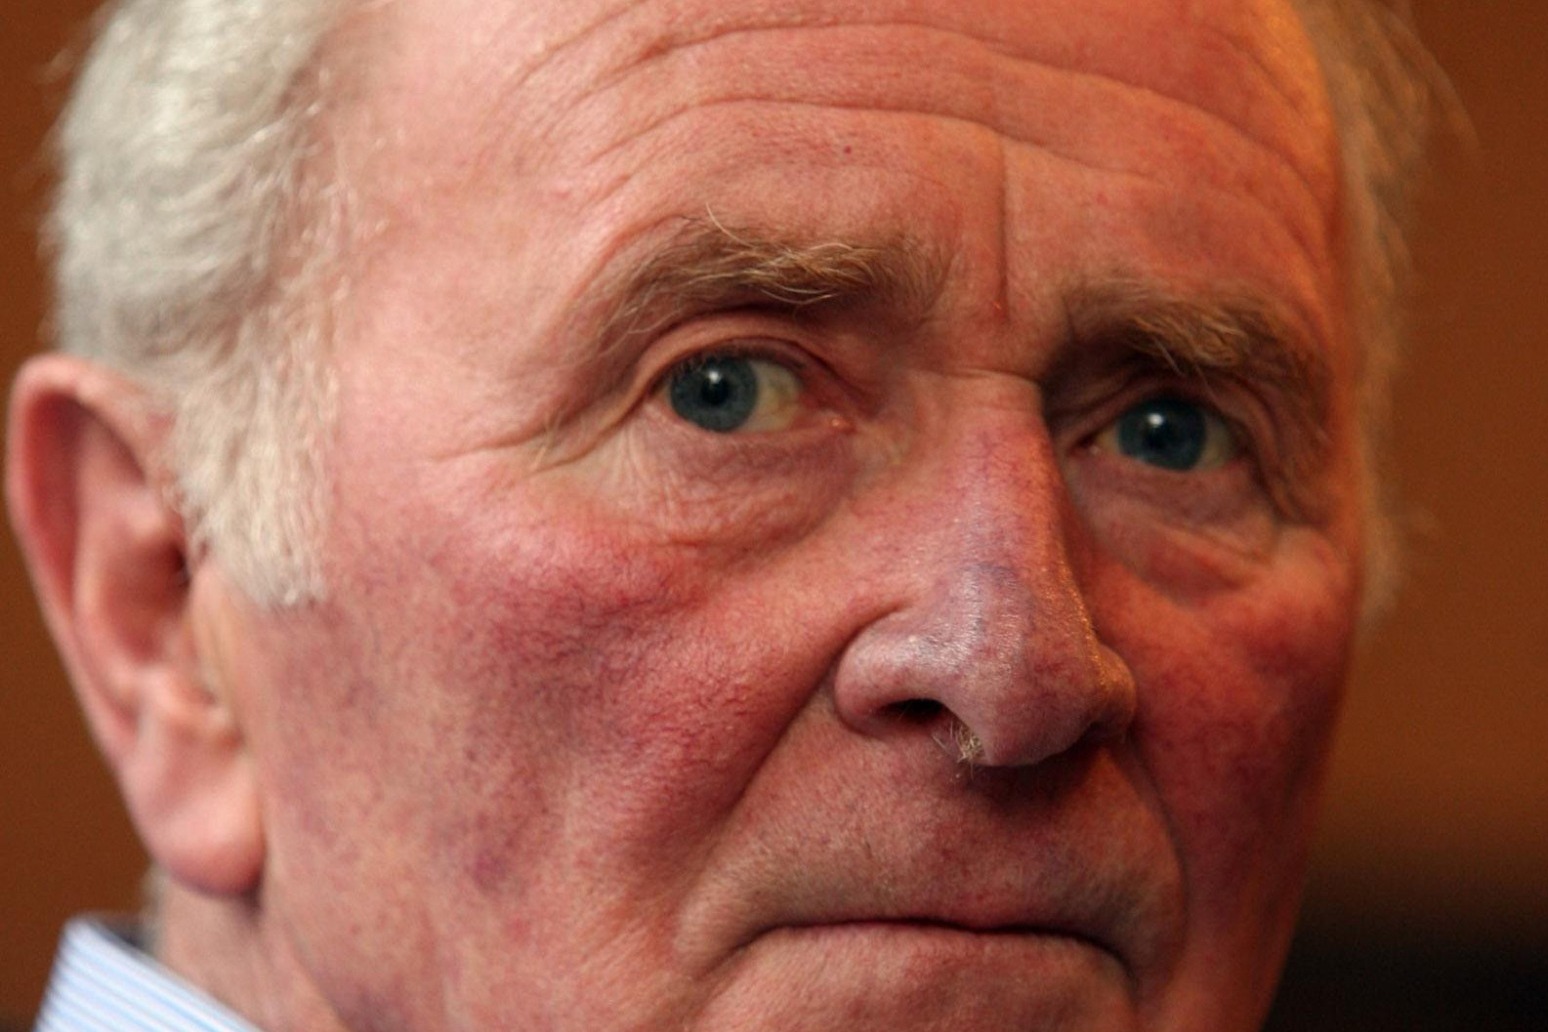 Manchester United great Harry Gregg dies aged 87 